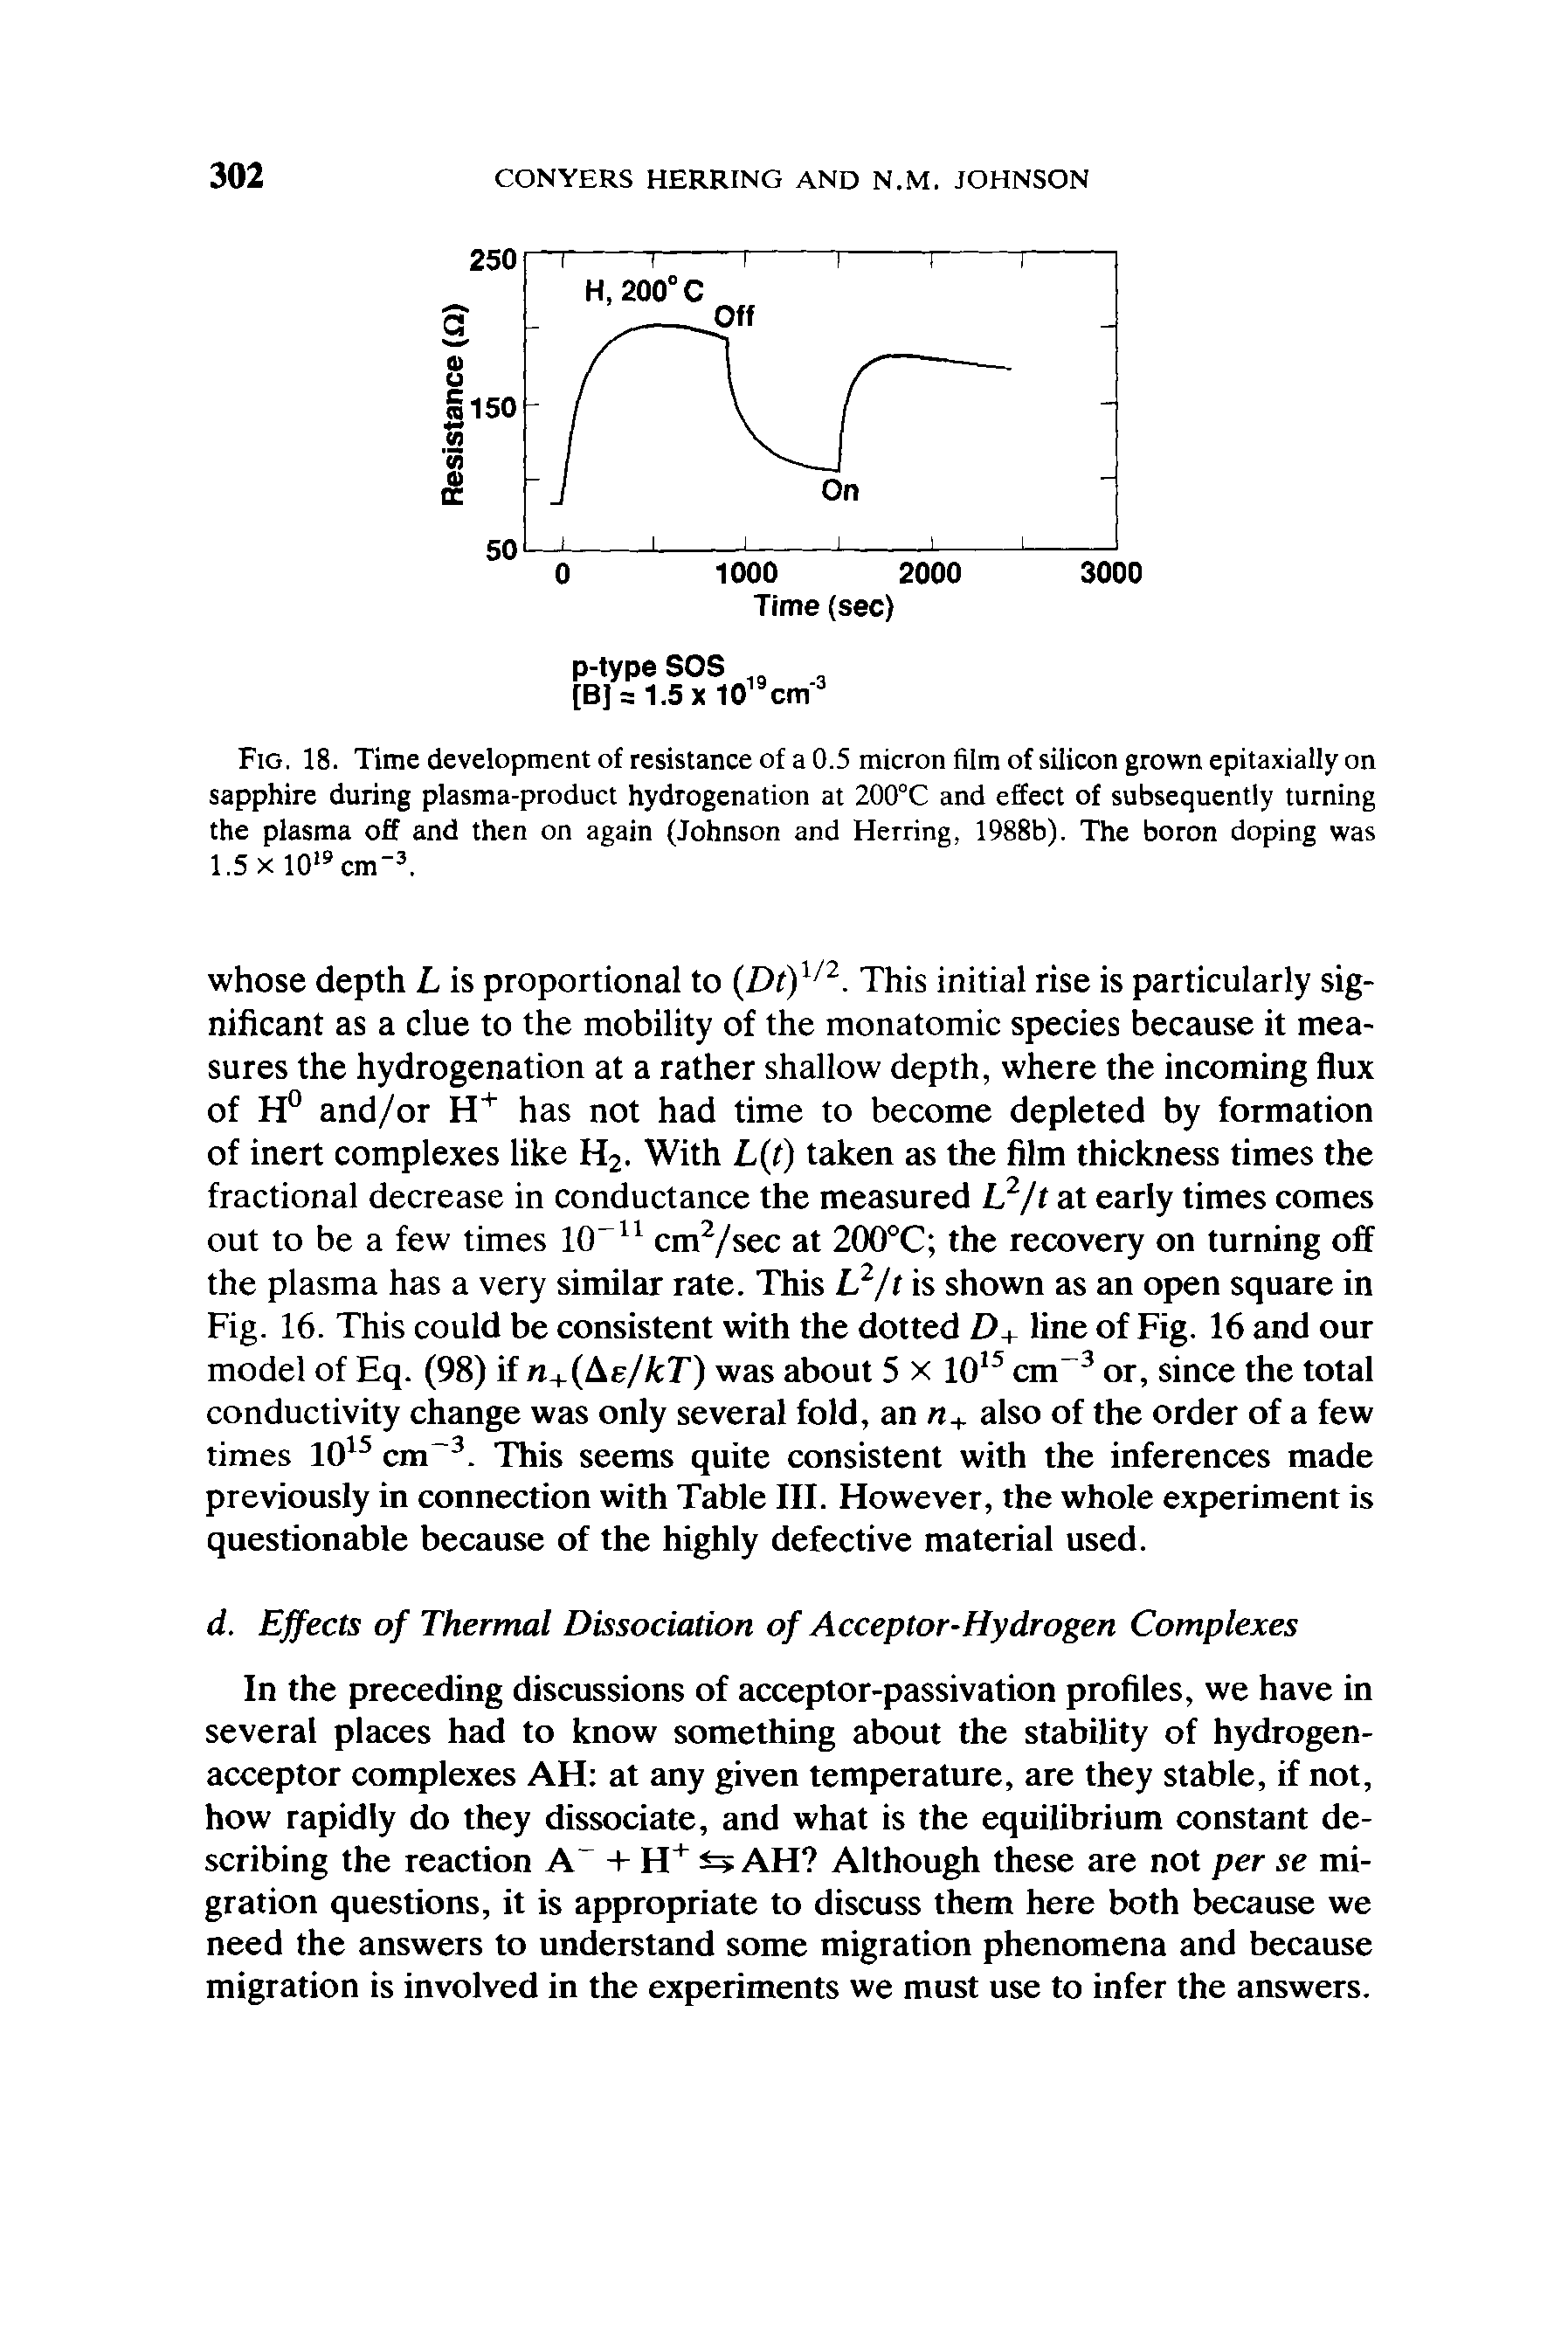 Fig. 18. Time development of resistance of a 0.5 micron film of silicon grown epitaxially on sapphire during plasma-product hydrogenation at 200°C and effect of subsequently turning the plasma off and then on again (Johnson and Herring, 1988b). The boron doping was 1.5 x 1019 cm-3.